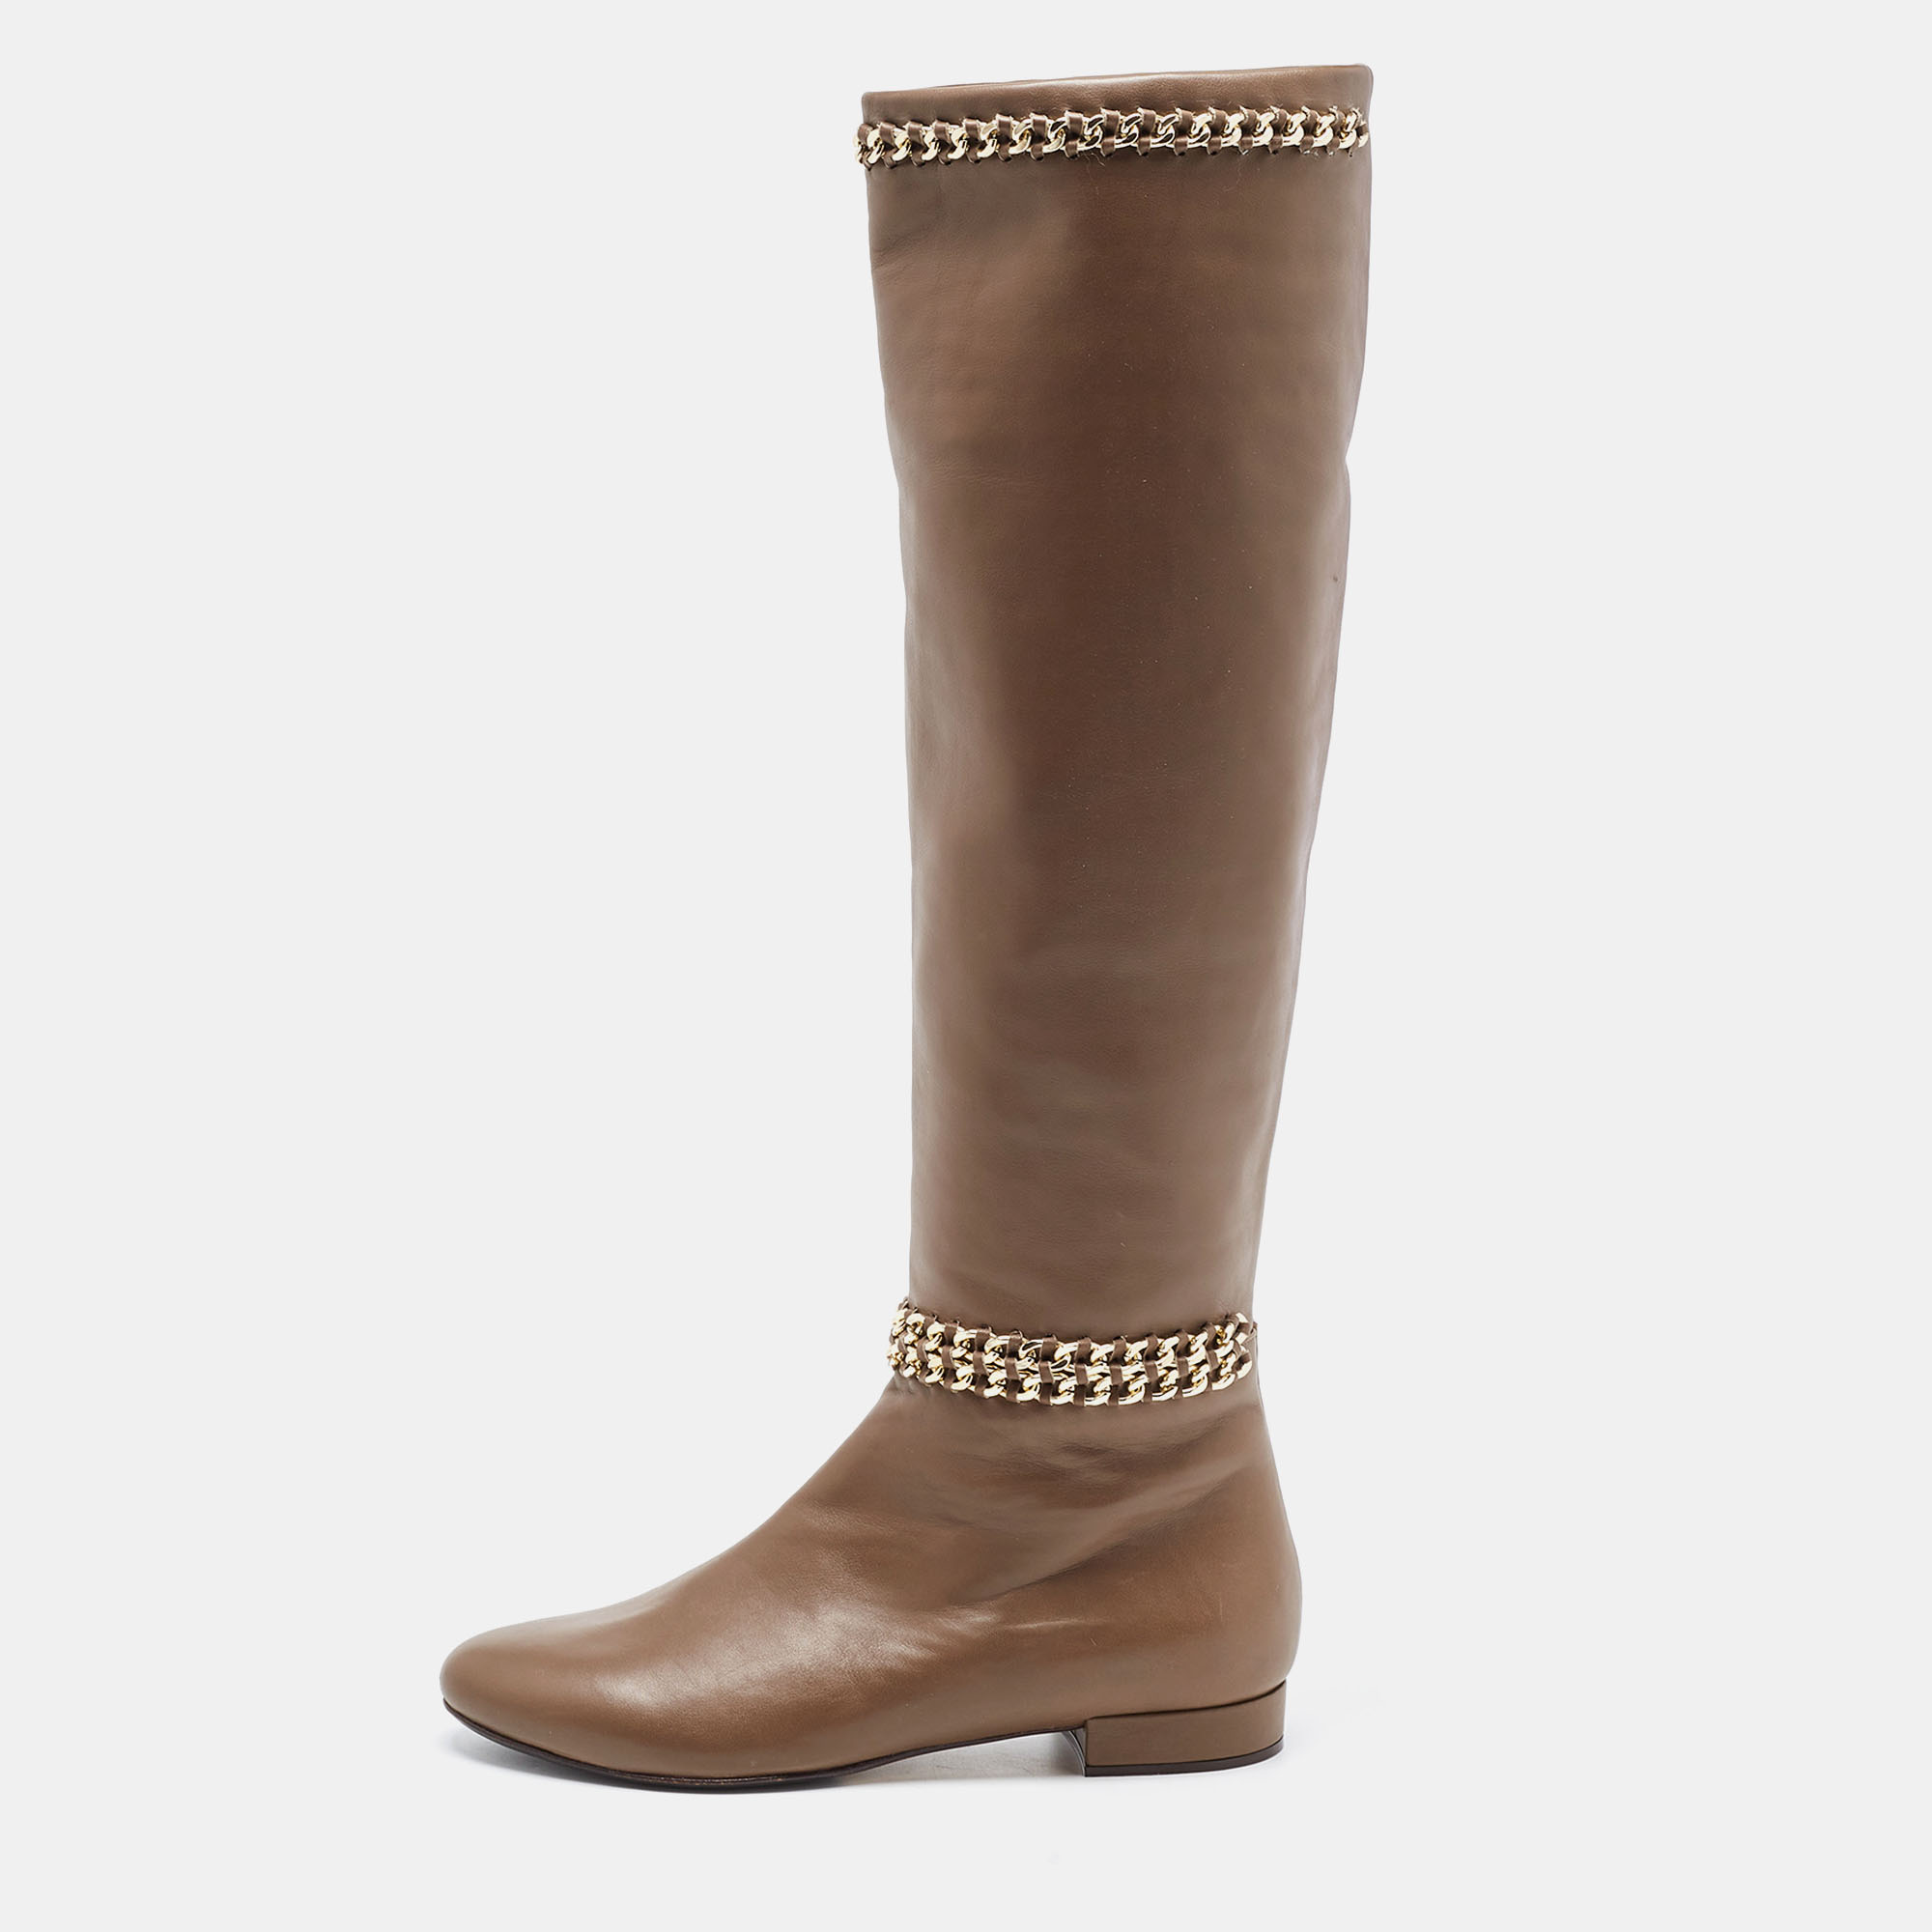 Le Silla Brown Leather Chain Detail Knee Length Boots Size 37